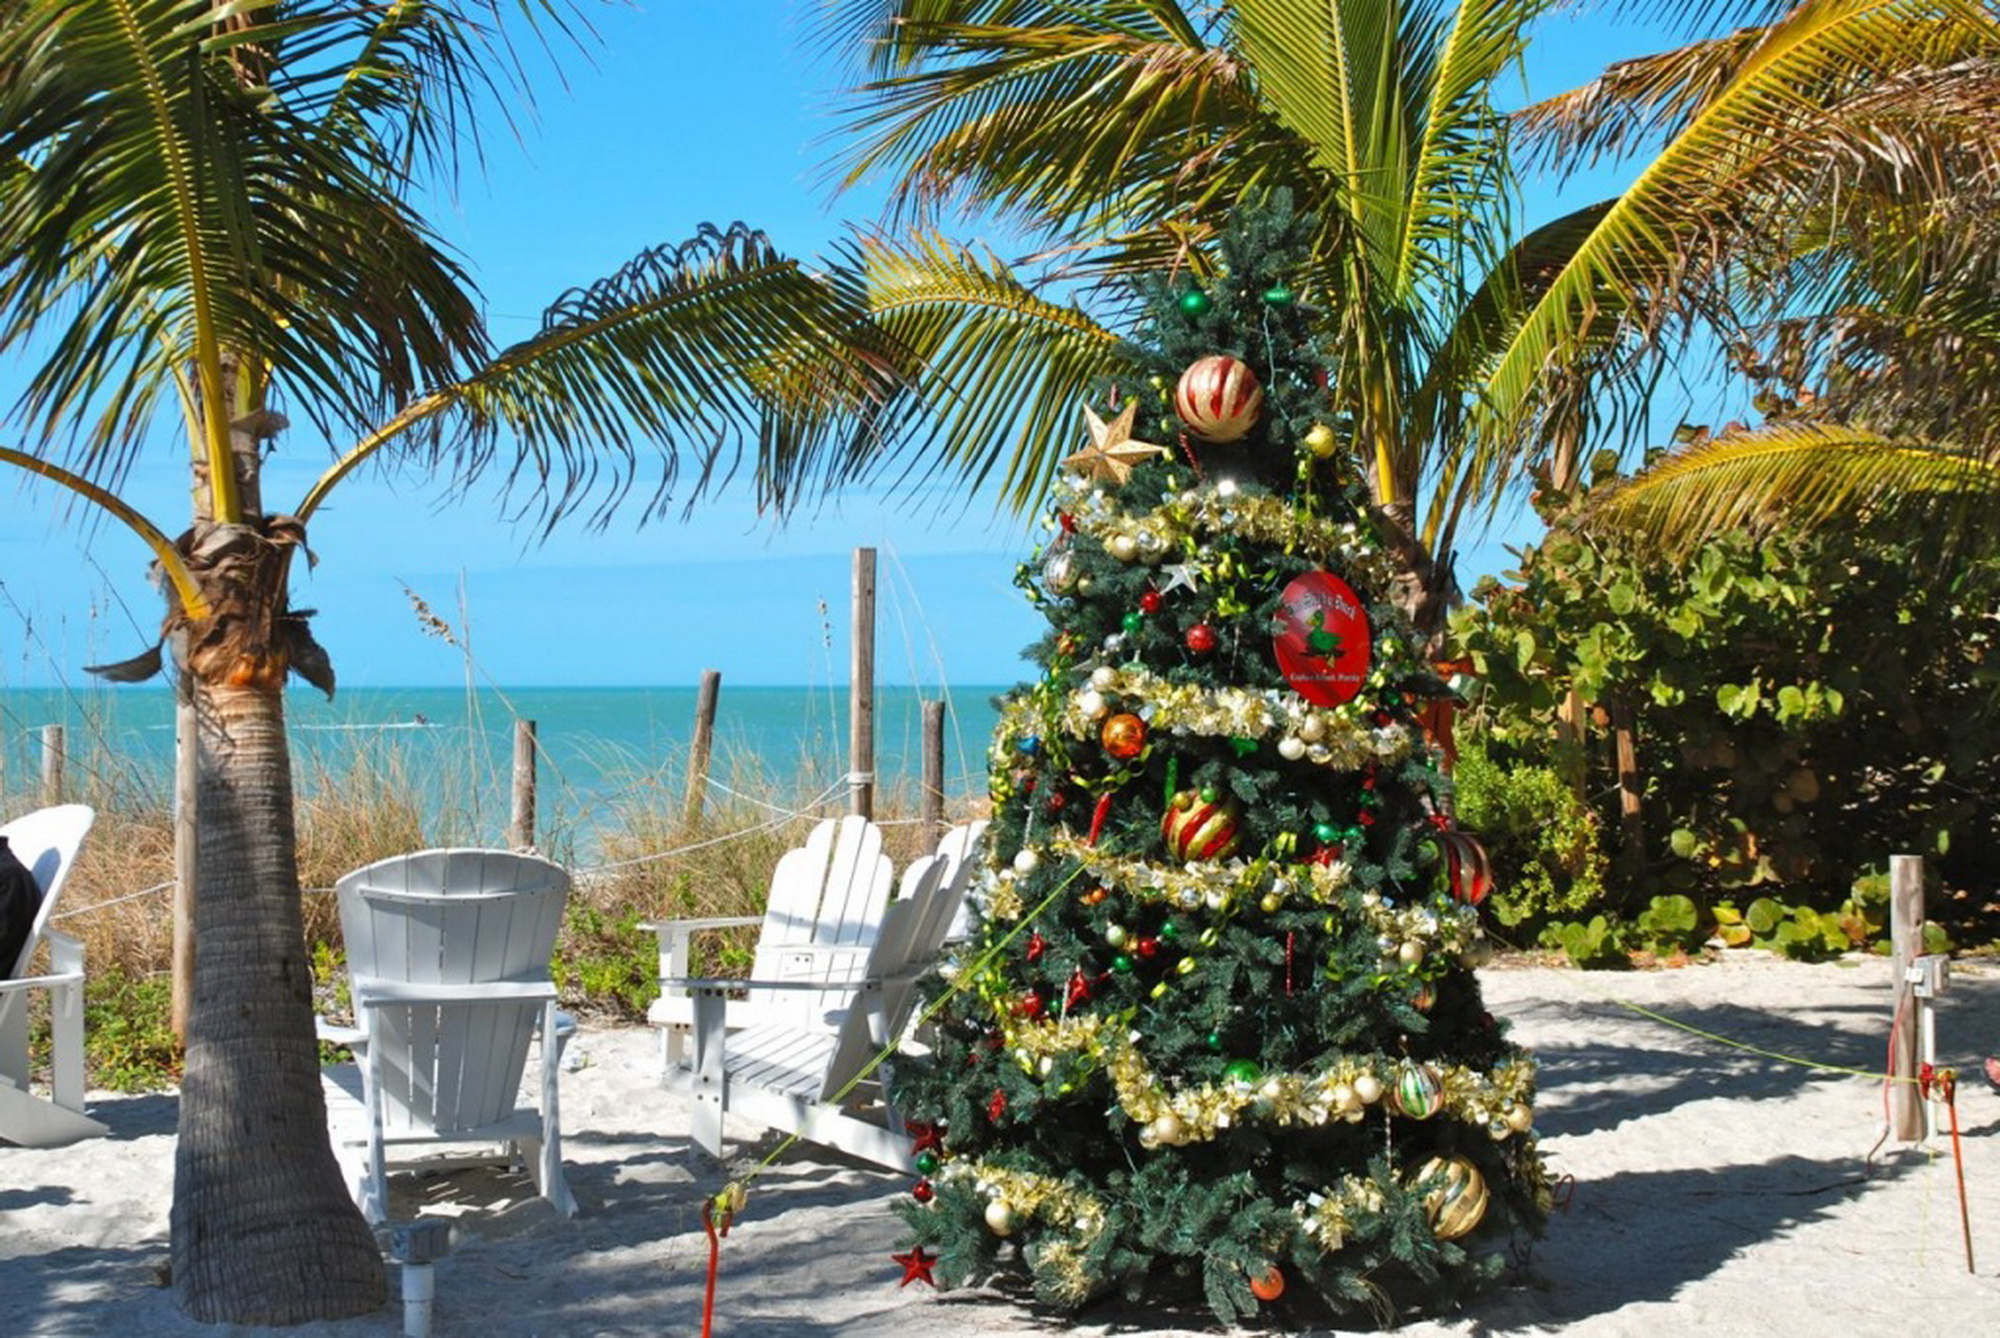 South Florida Vacation Rental Accommodations During The Holidays 5 Vacation Injuries South Florida Injury Law Firm